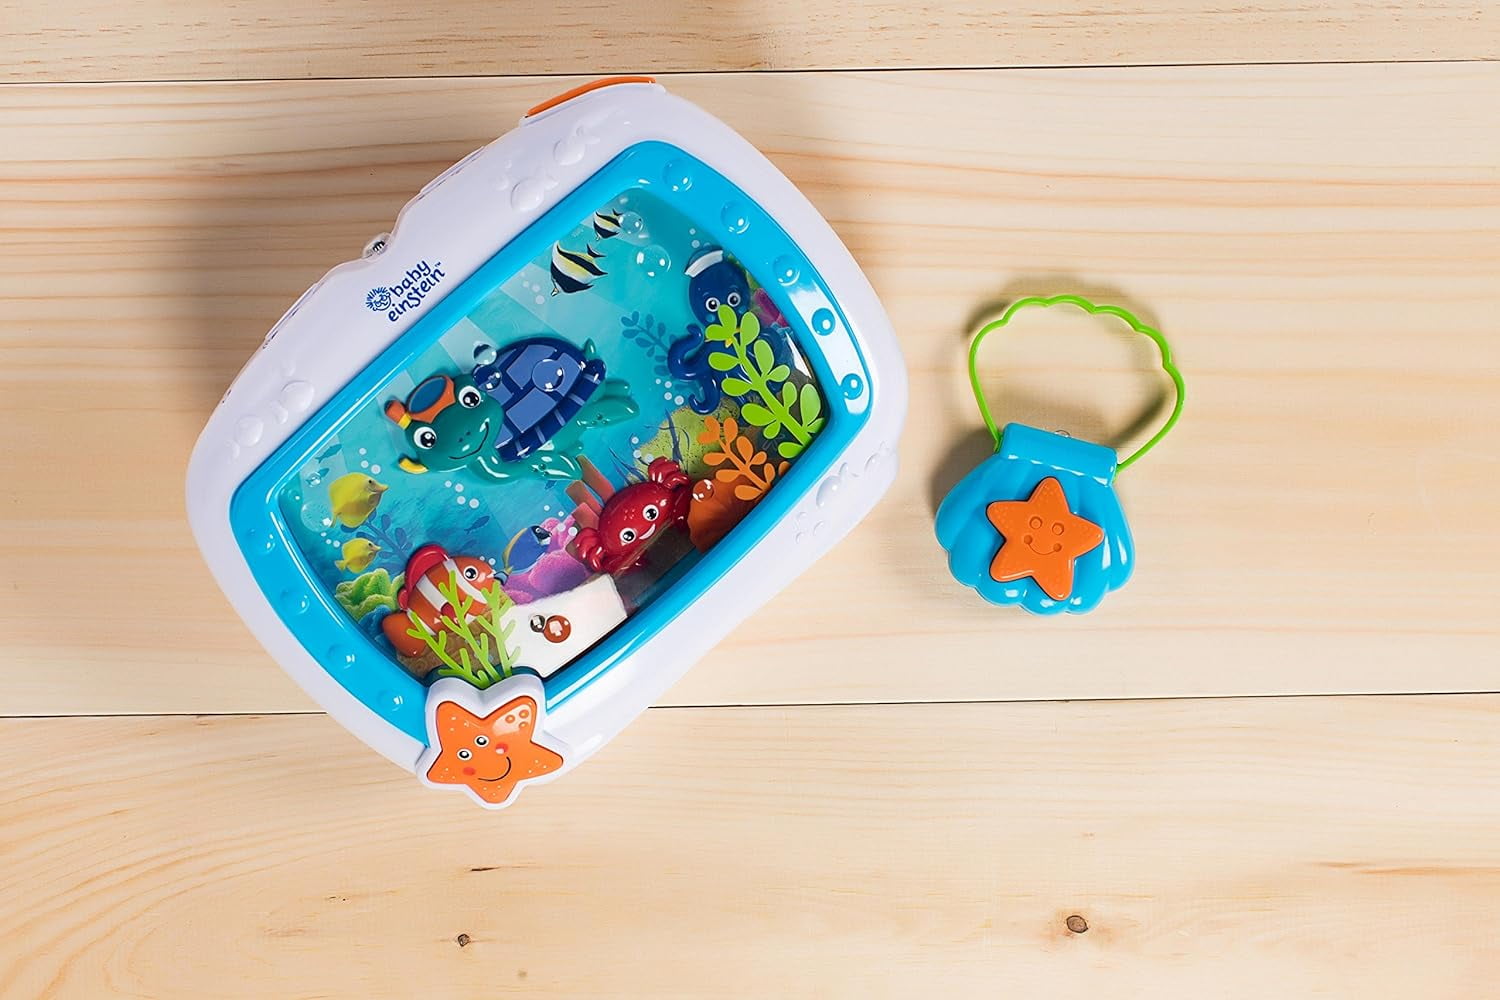 Baby Einstein Sea Dreams Soother, Crib Mount 